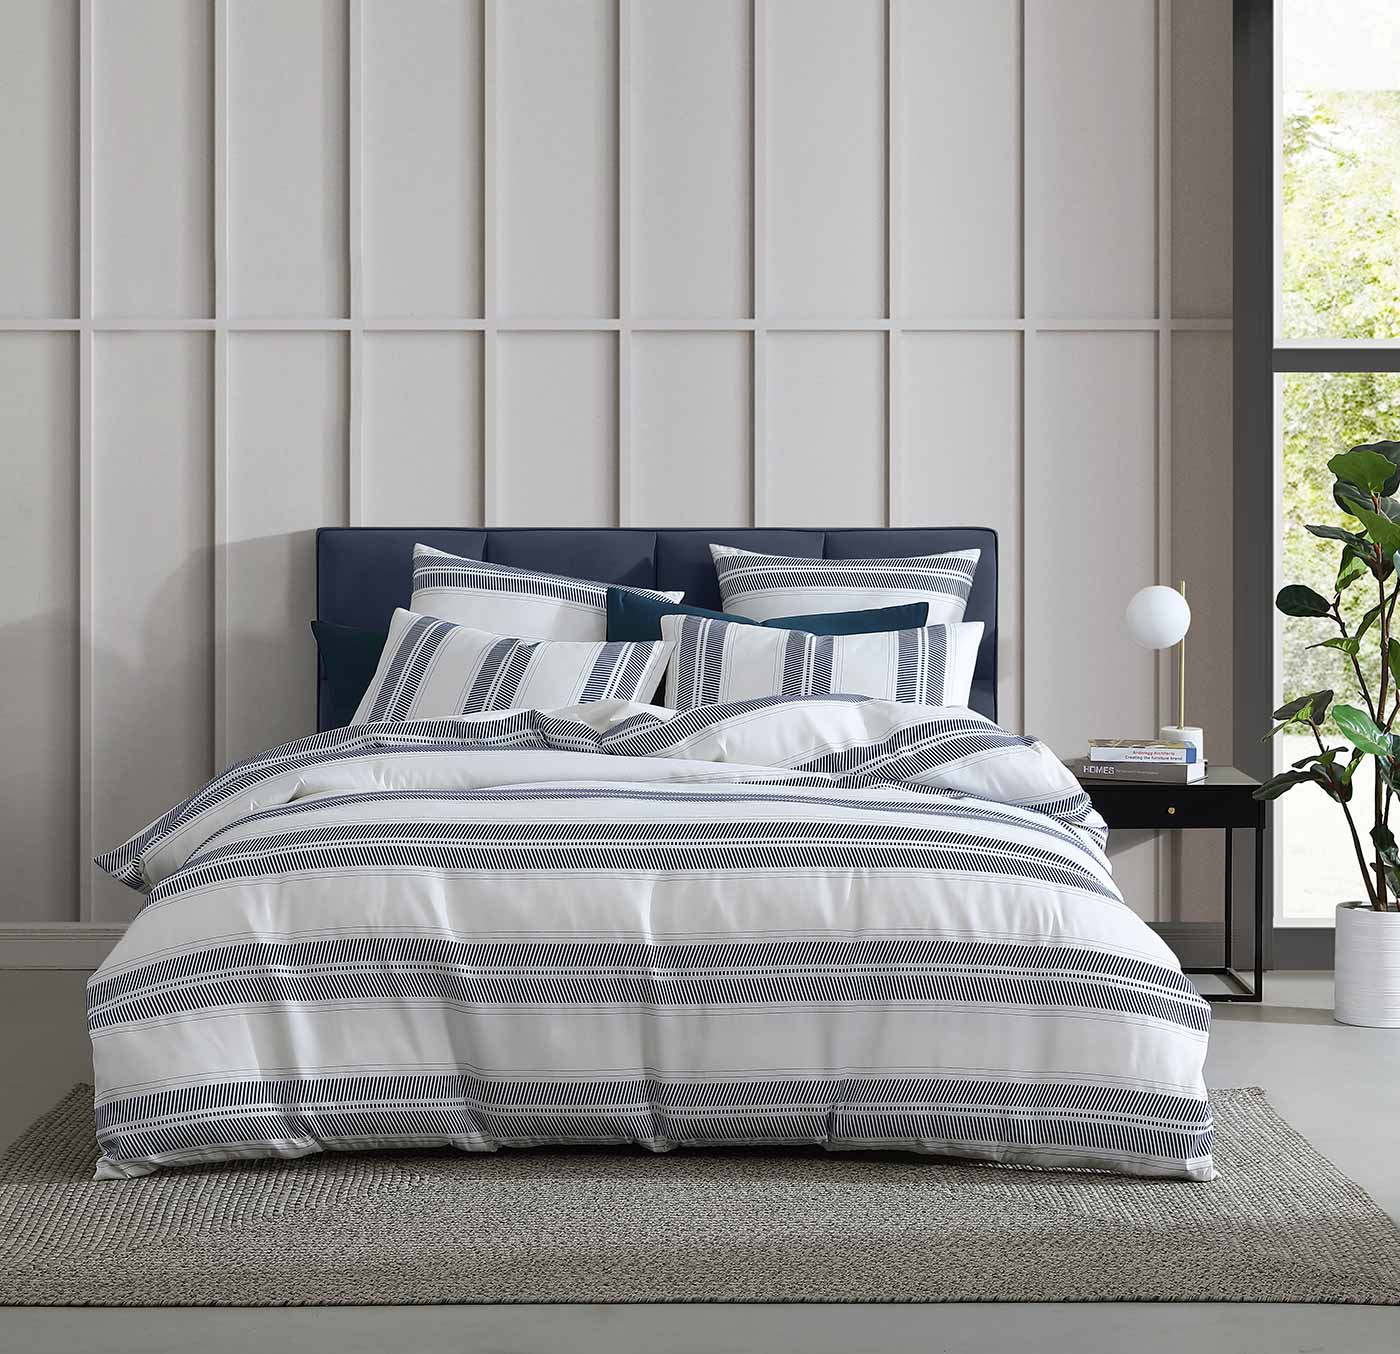 The Cadet Navy Quilt Cover Set provides a relaxed, coastal look in a timeless navy hue. It features large textured stripes for an unmistakable summer feel. 